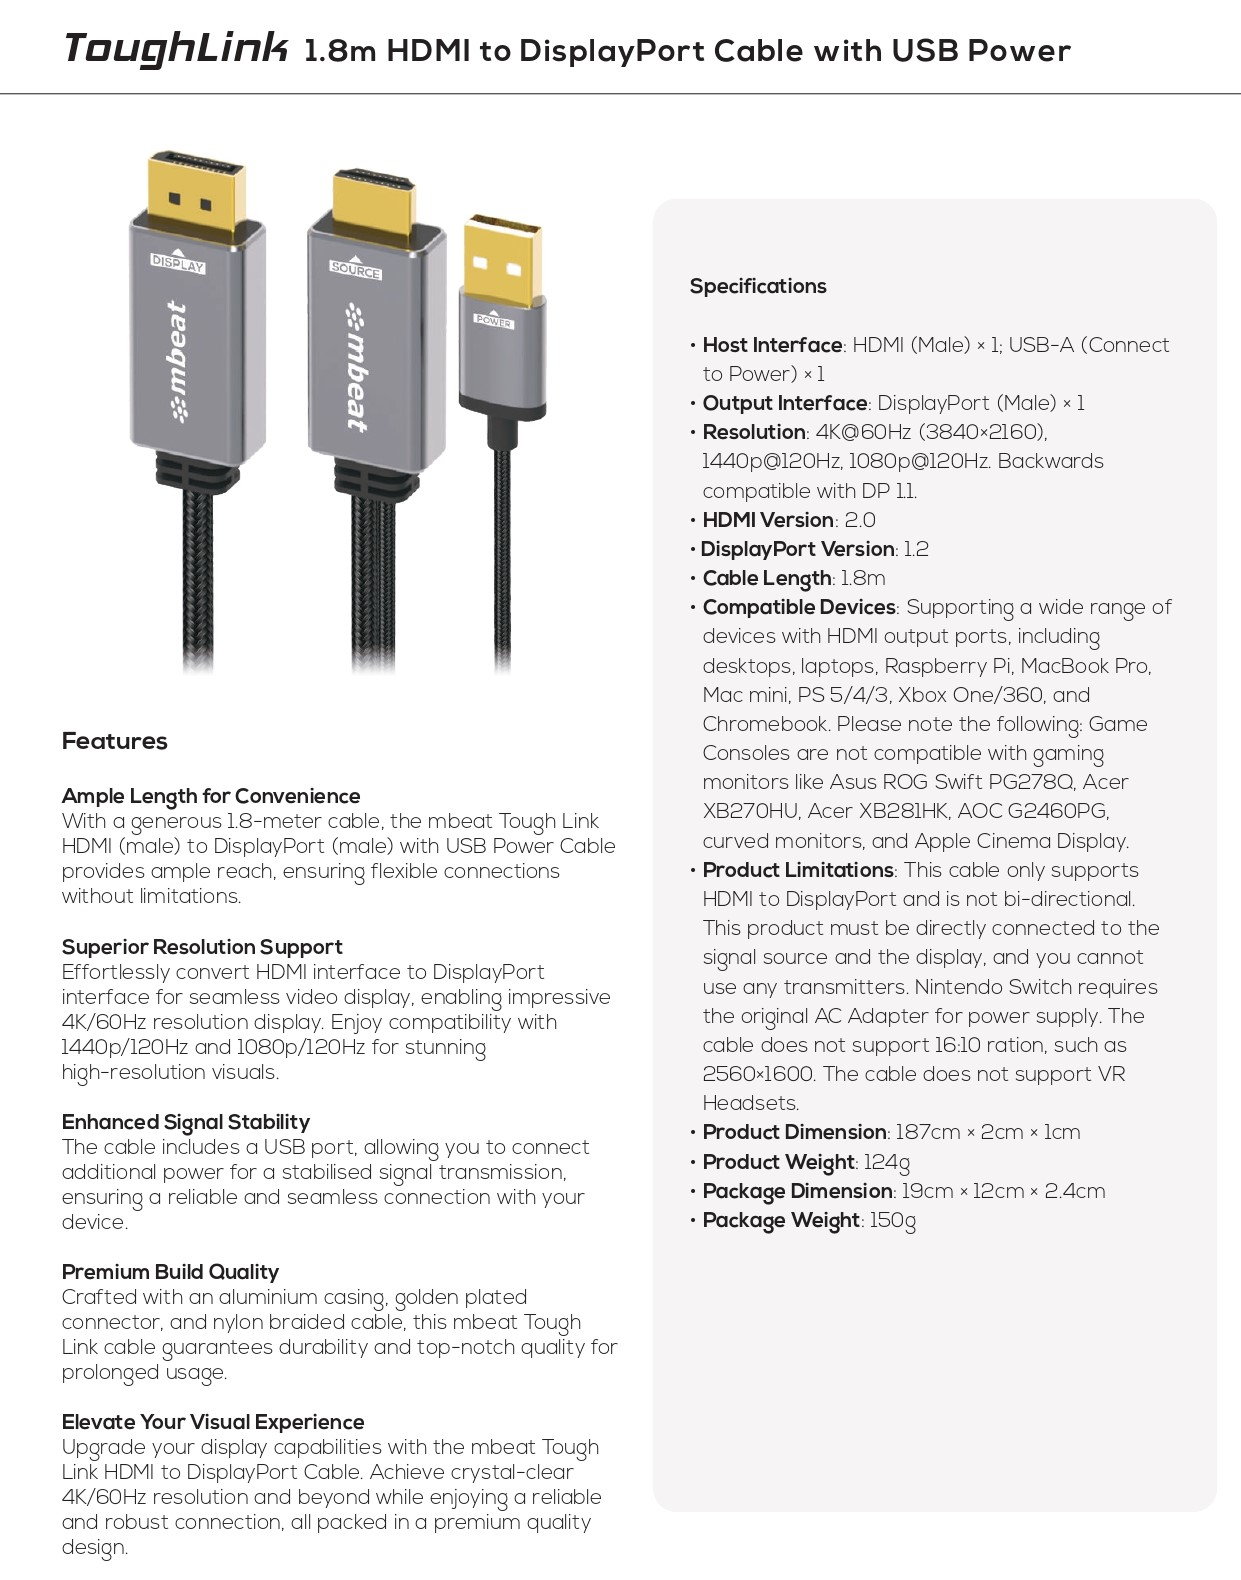 A large marketing image providing additional information about the product mbeat Tough Link HDMI to DisplayPort Cable with USB Power - 1.8m - Additional alt info not provided